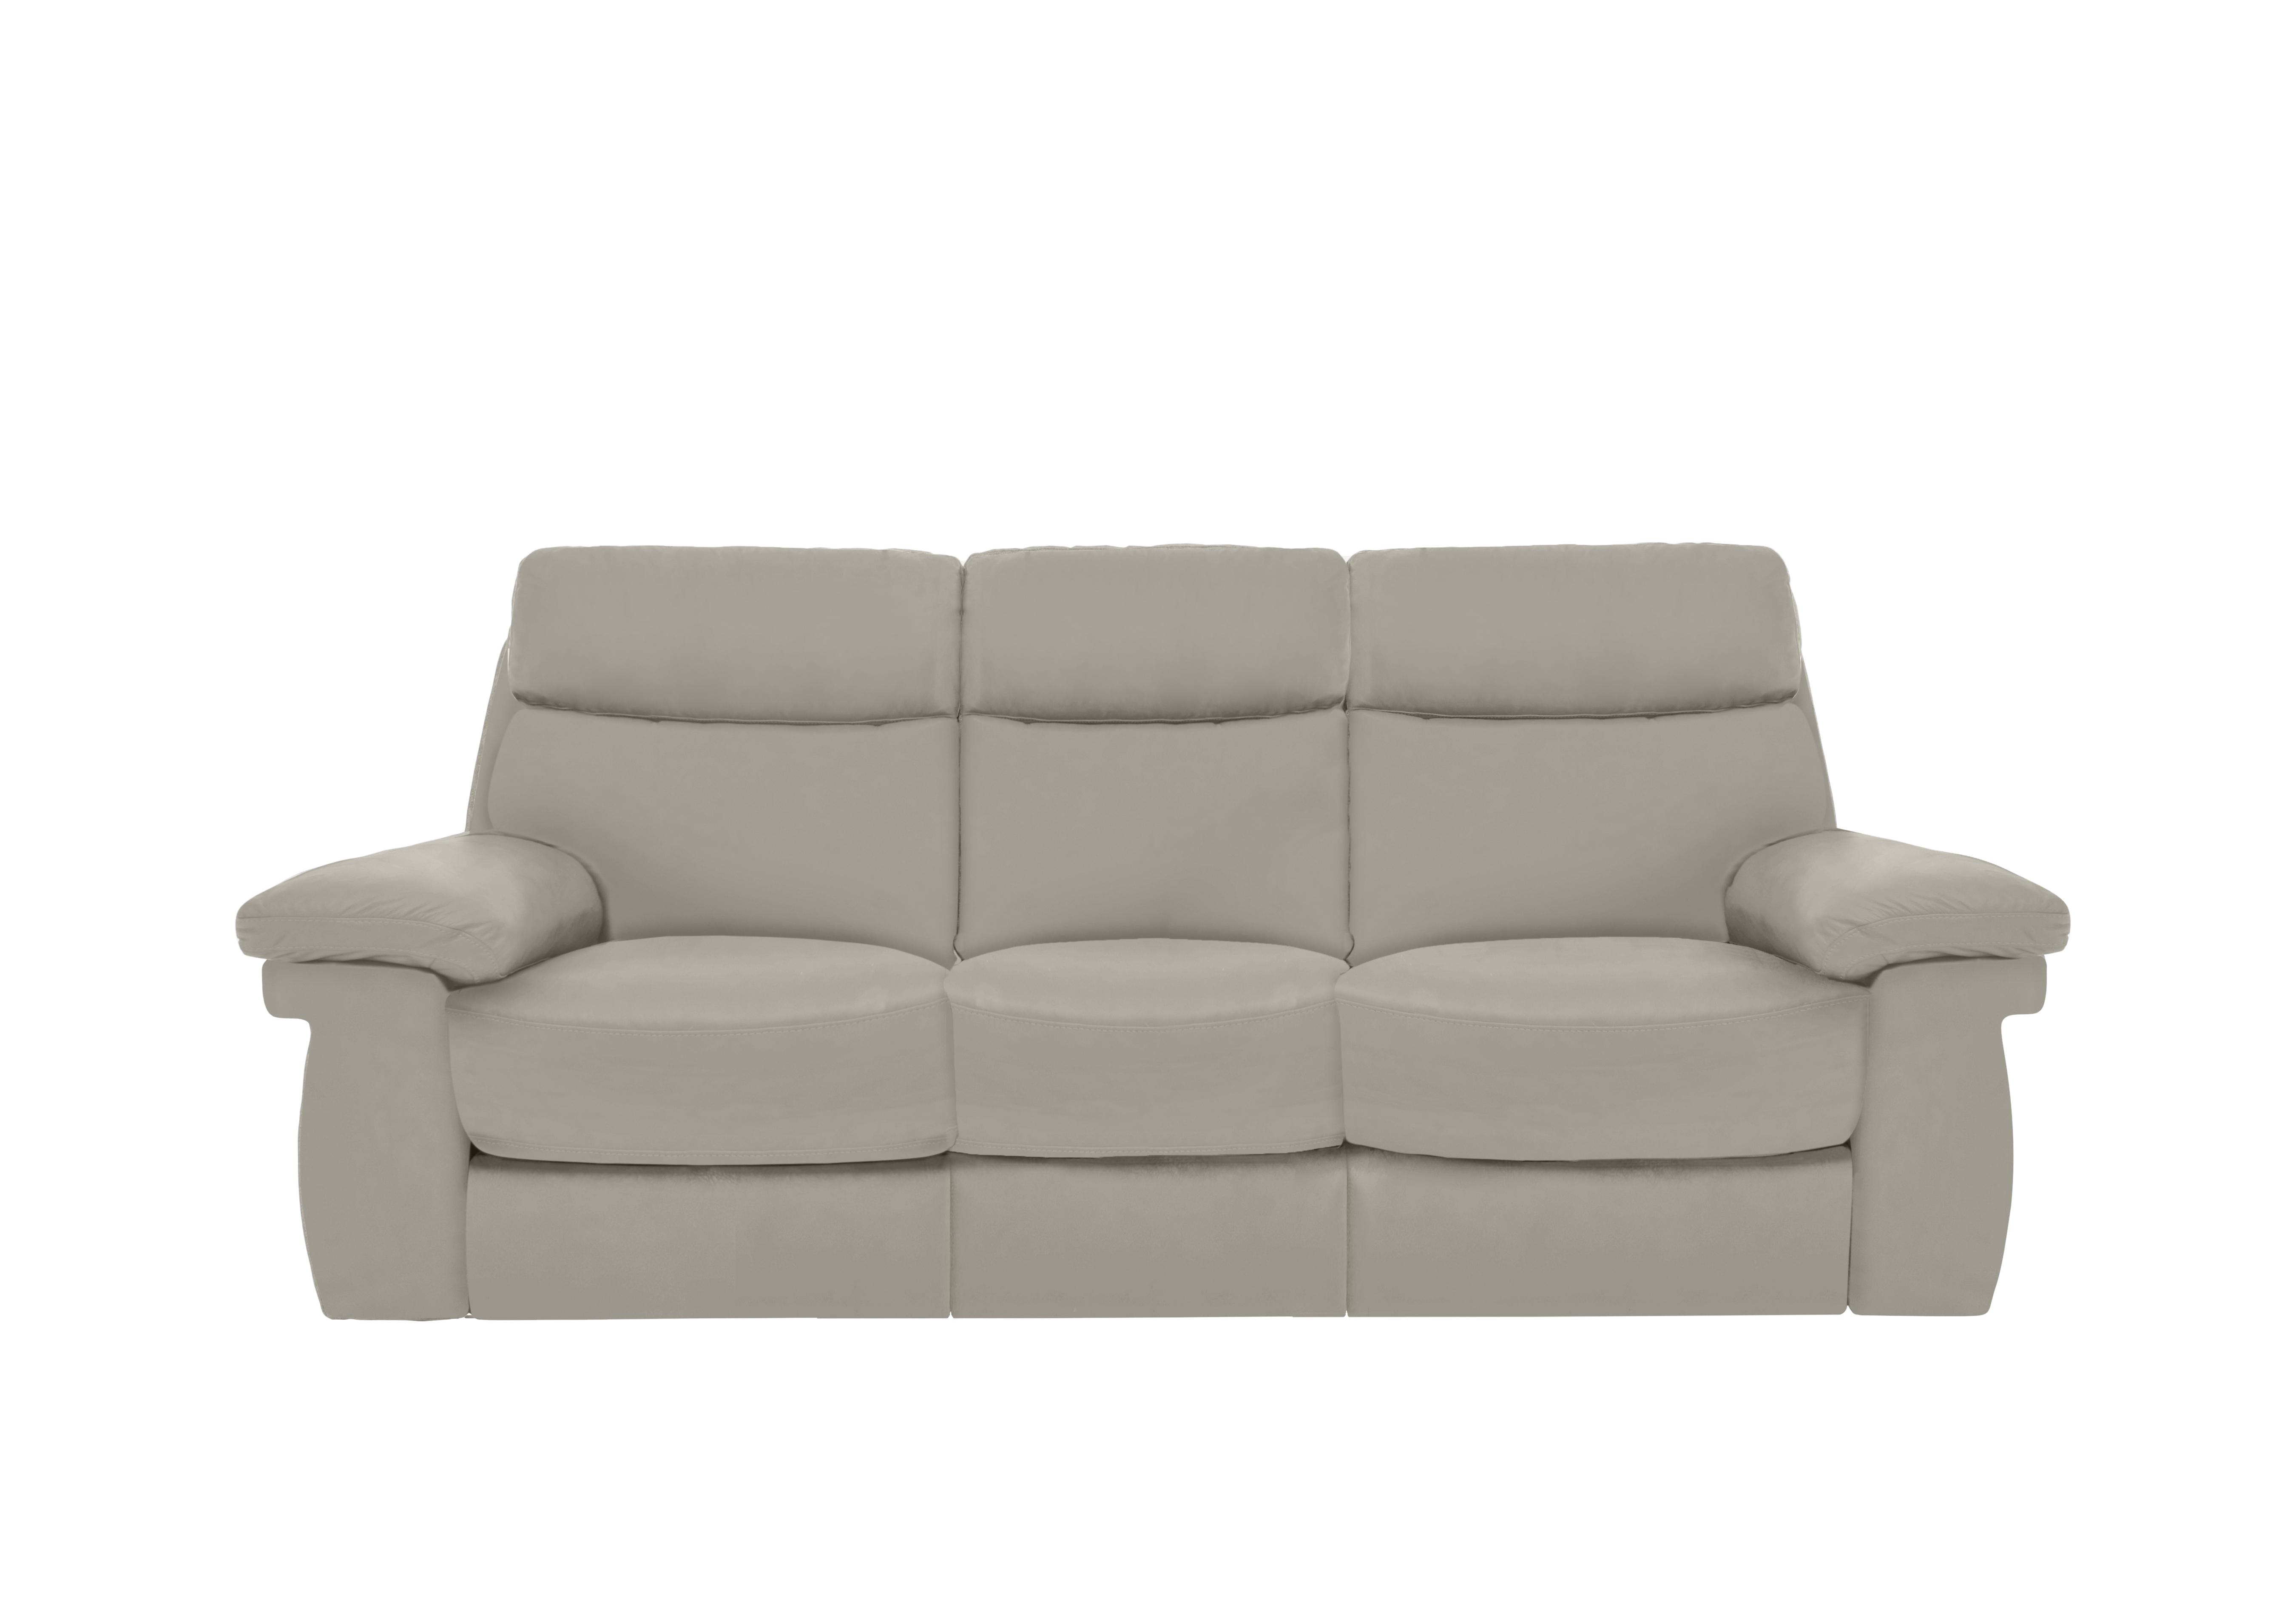 Serene 3 Seater Leather Power Recliner Sofa with Drop Down Table in Bx-251e Grey on Furniture Village